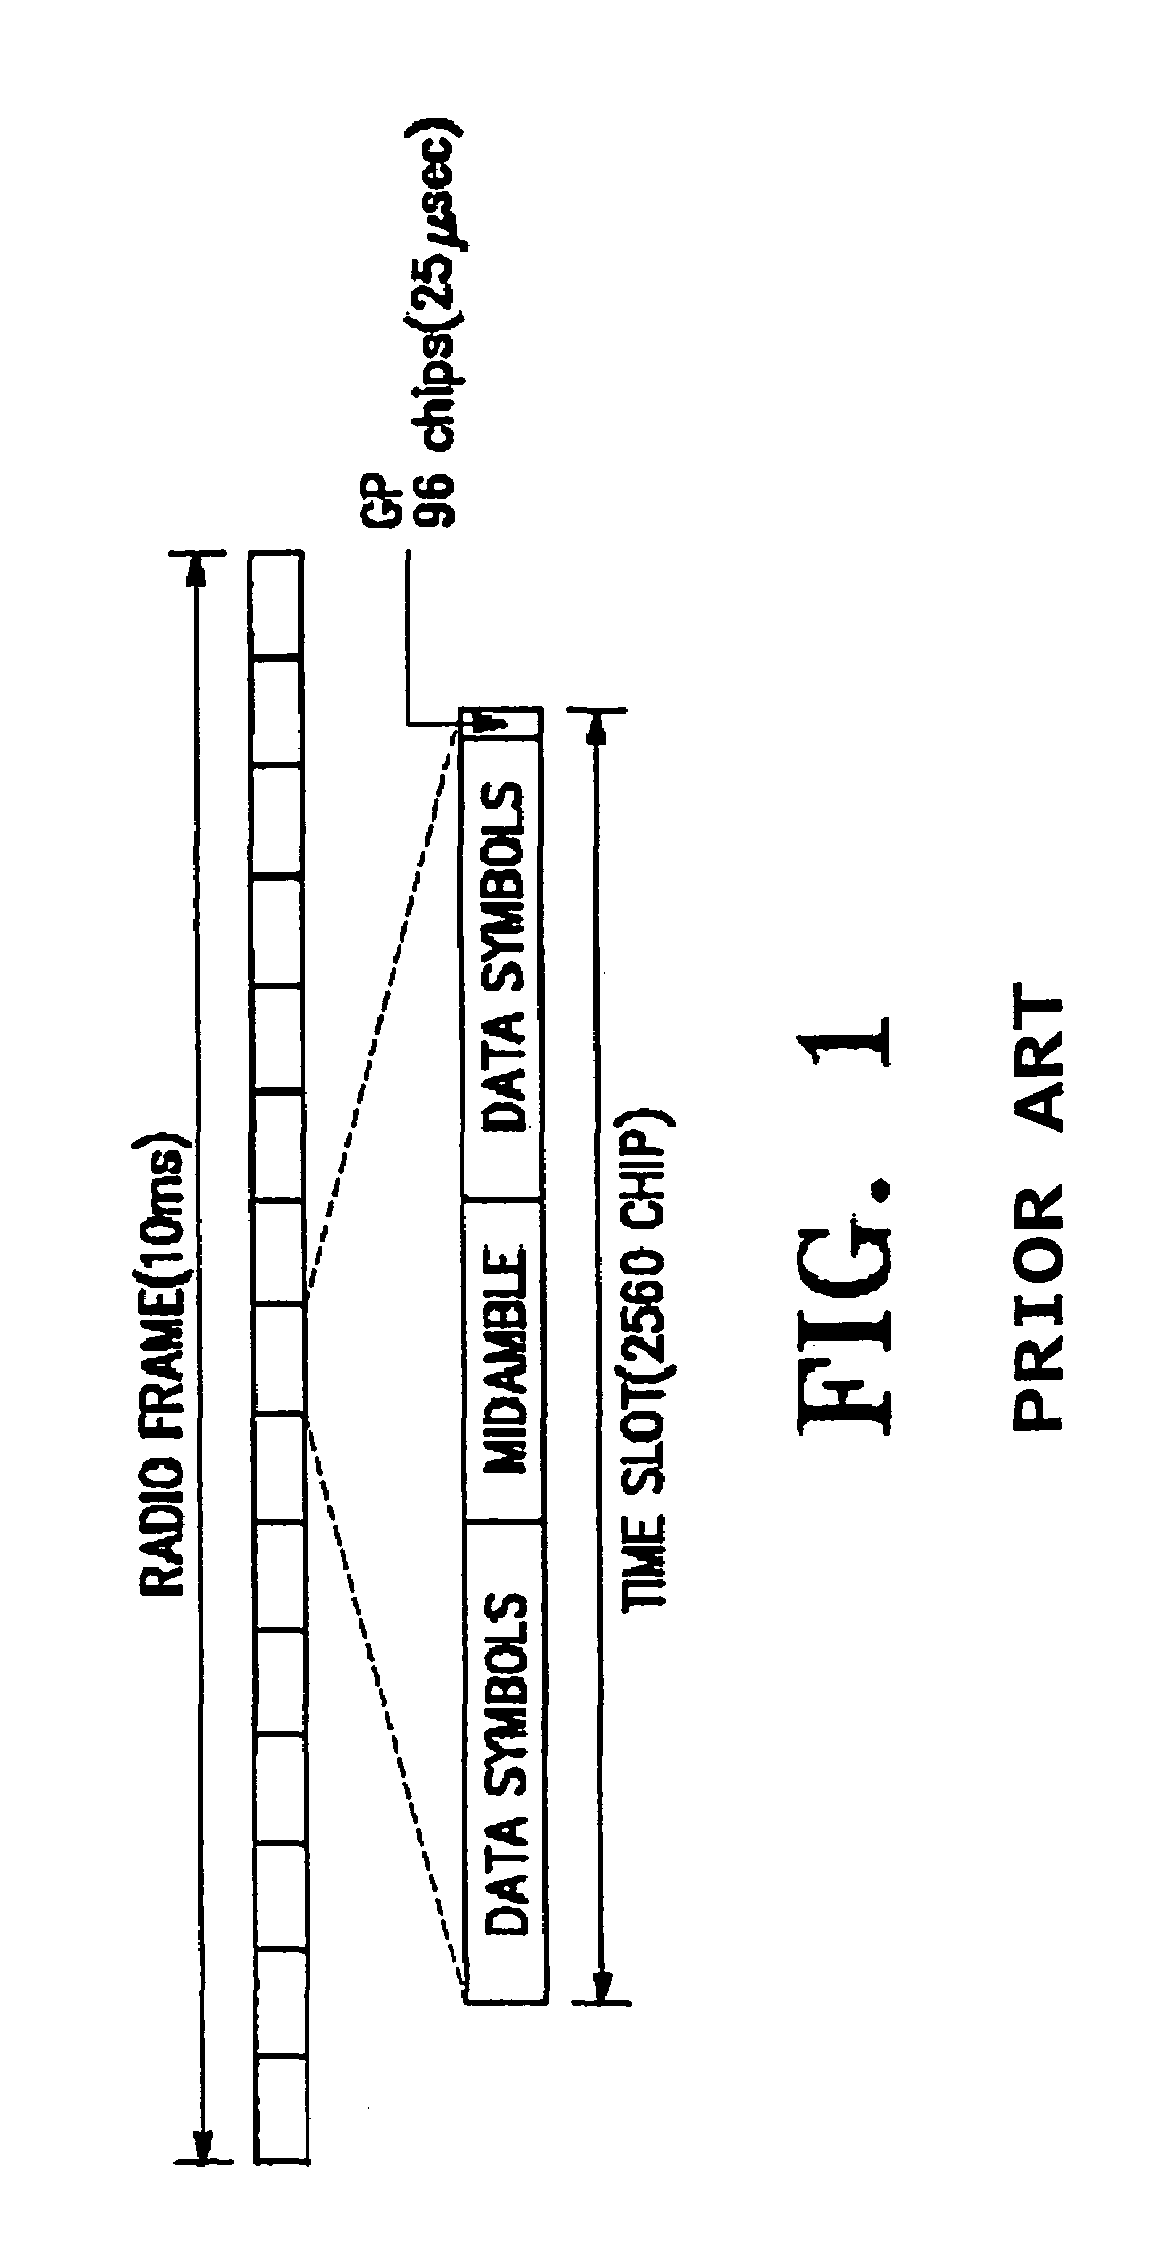 TSTD apparatus and method for a TDD CDMA mobile communication system